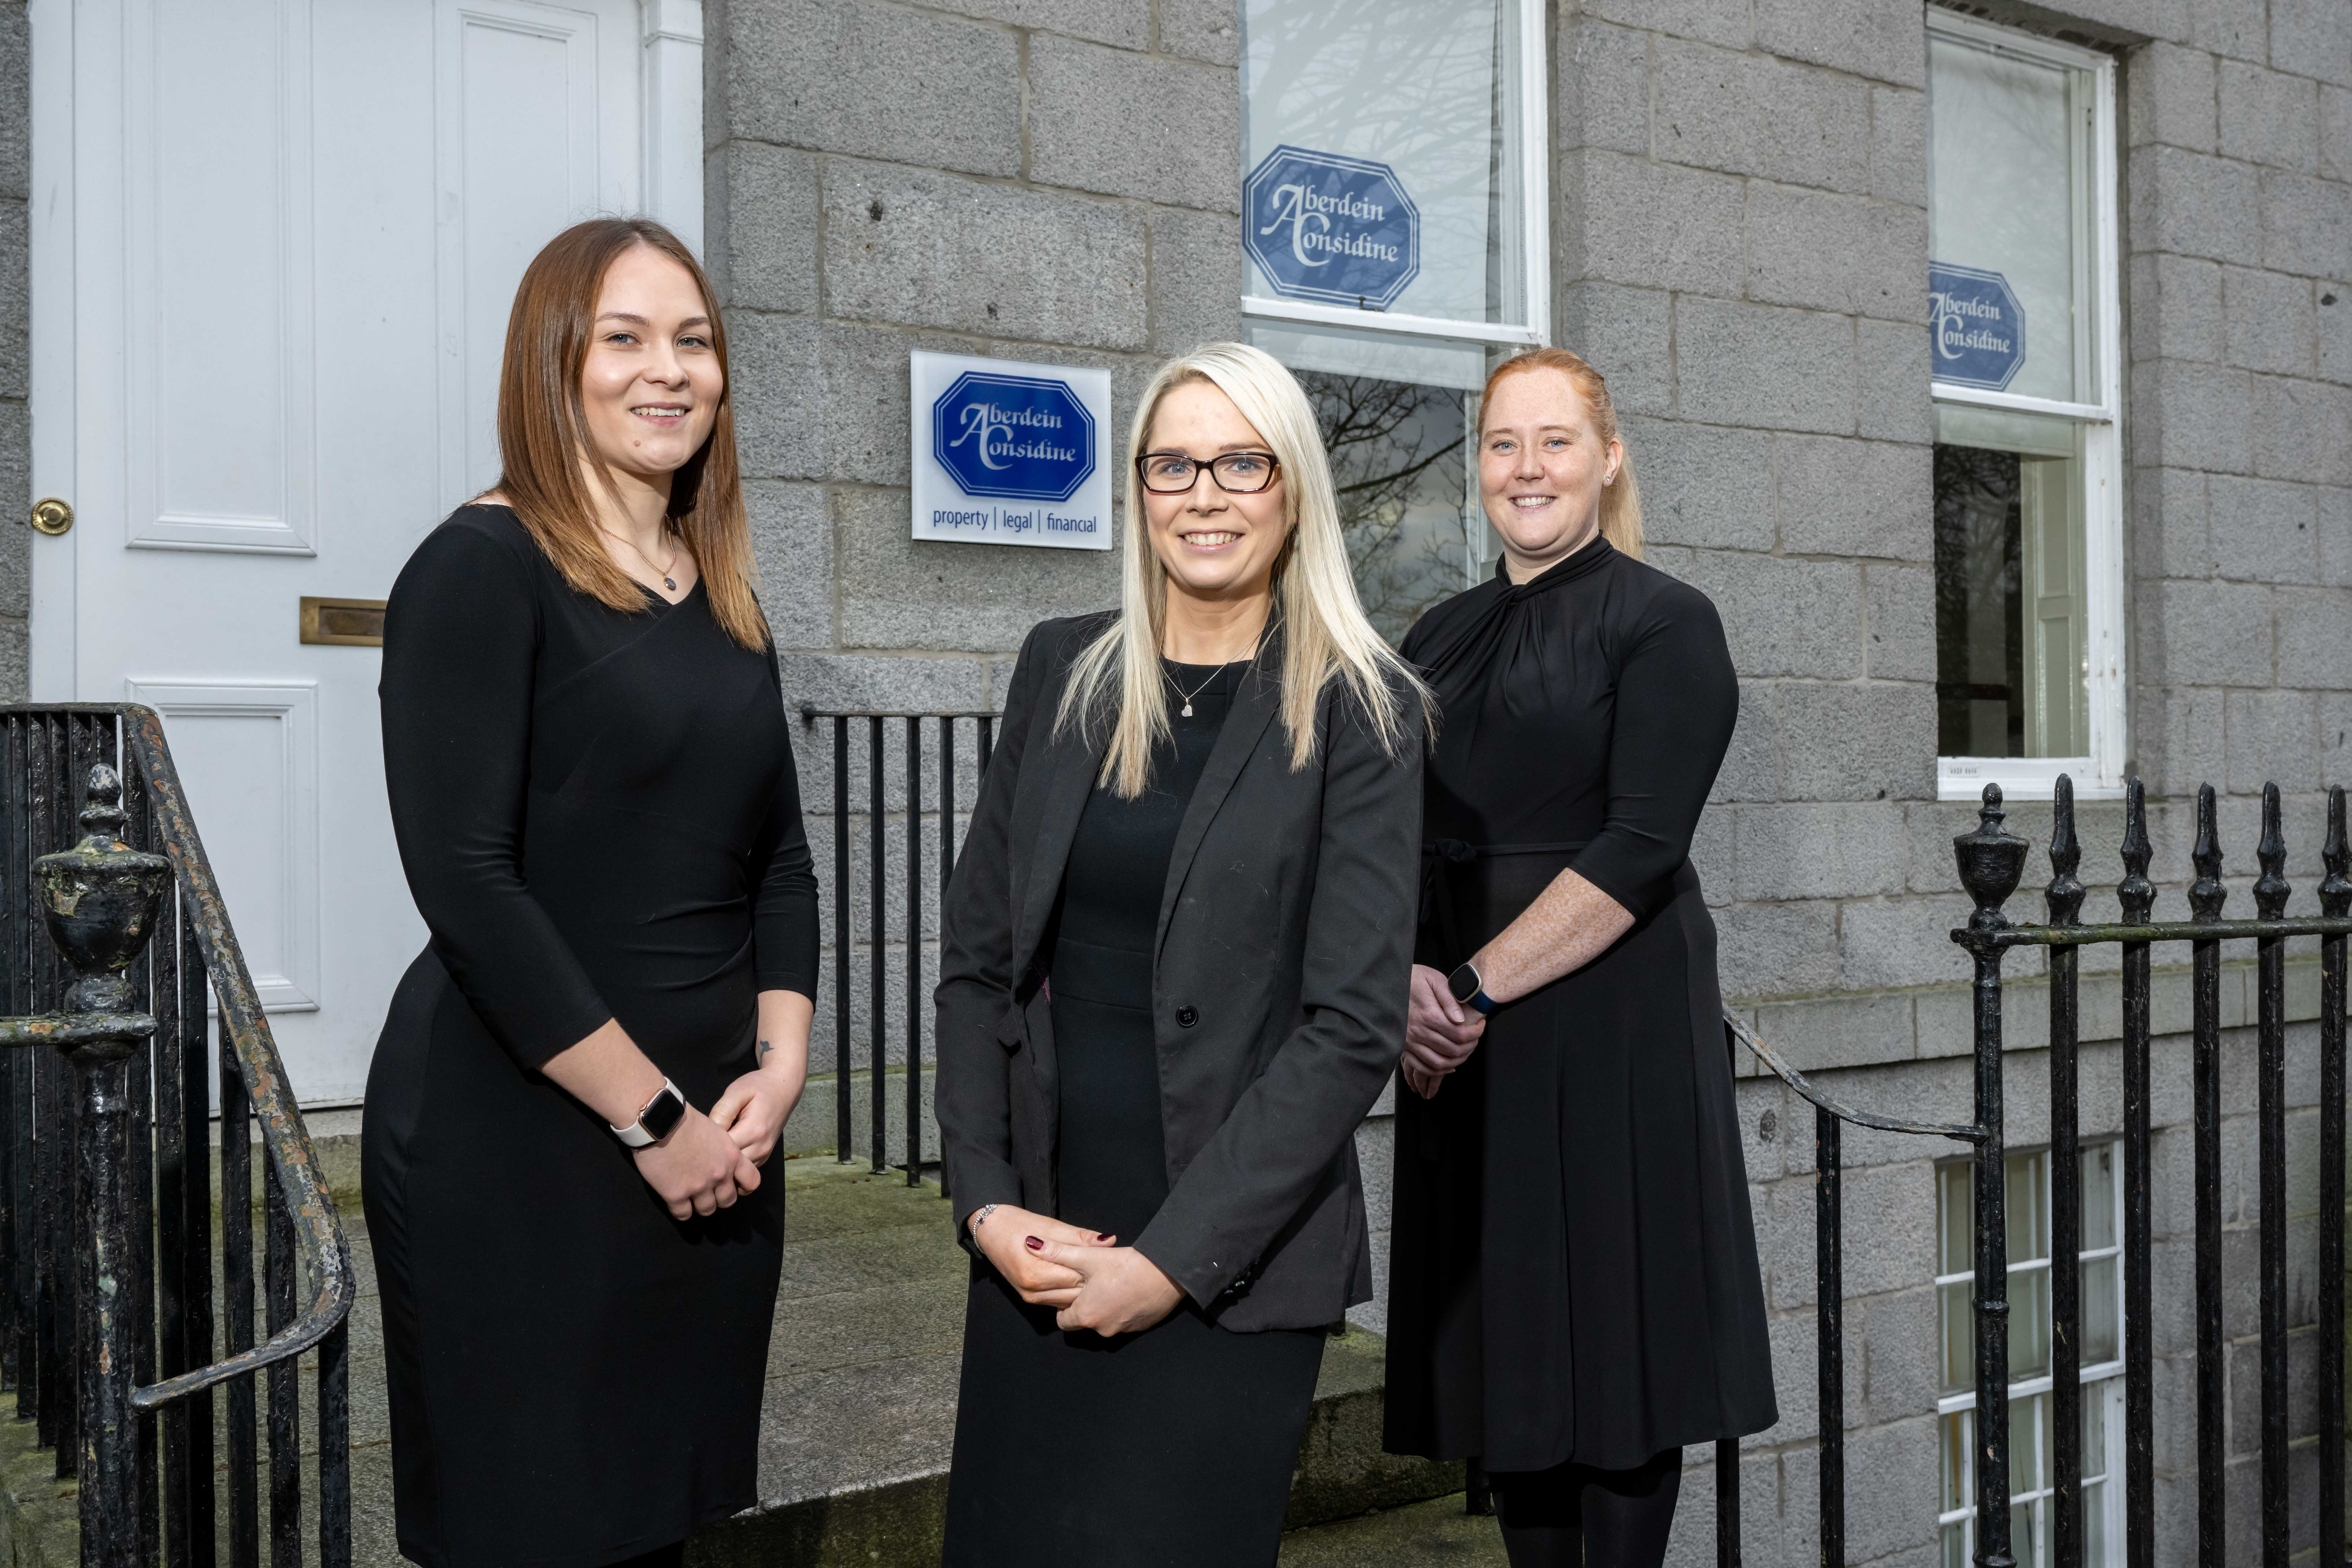 Aberdein Considine promotes legal and property specialists as growth continues